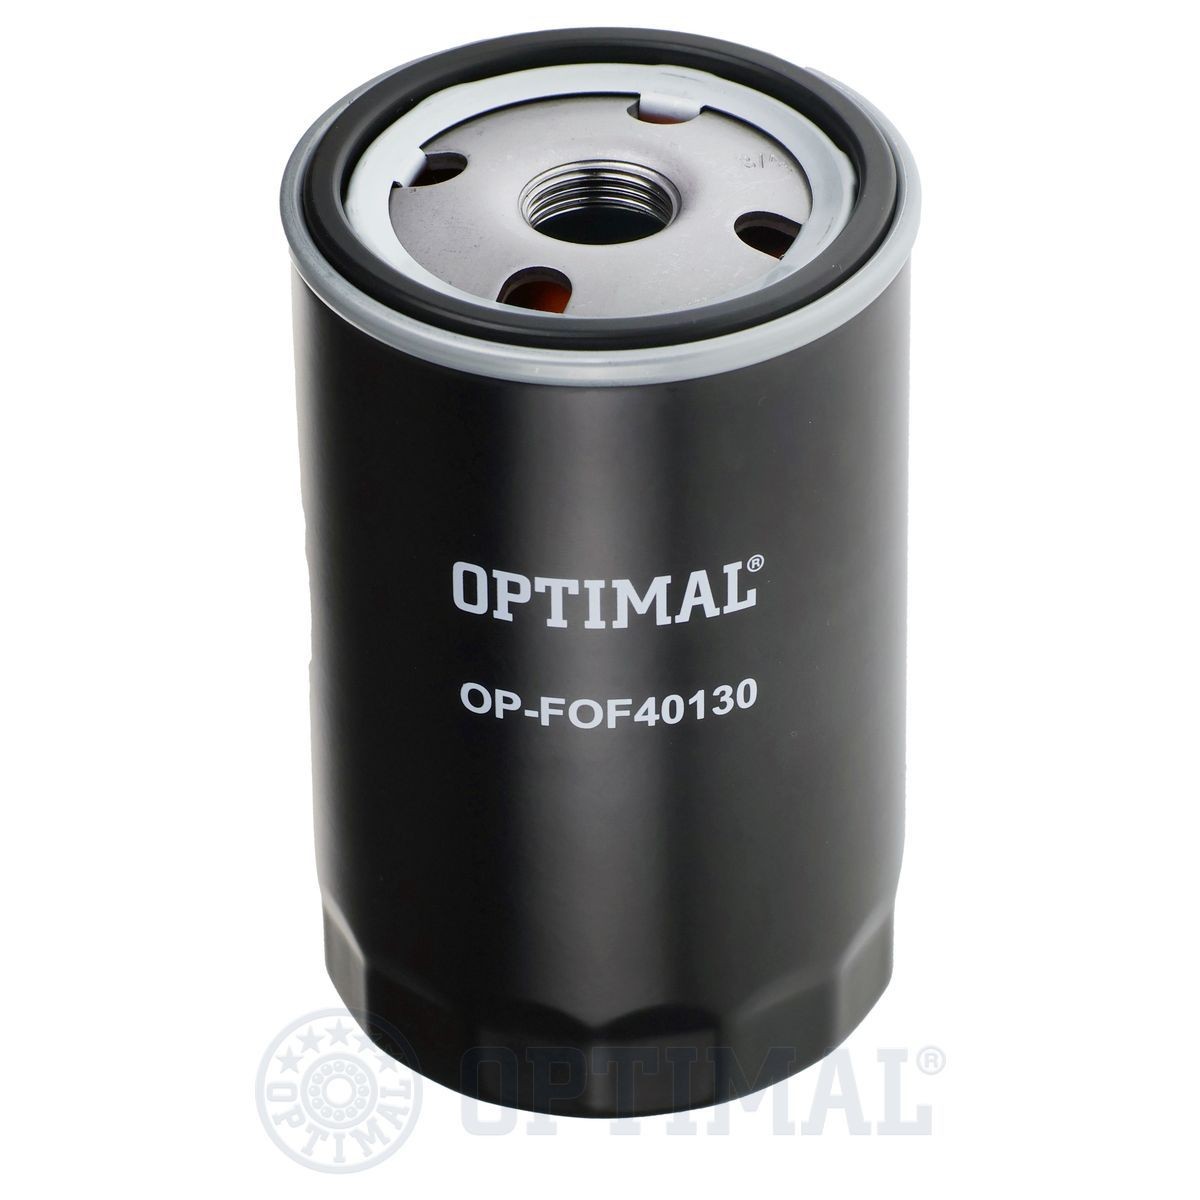 OPTIMAL OP-FOF40130 Oil filter 3/4-16 UNF, with two anti-return valves, Spin-on Filter